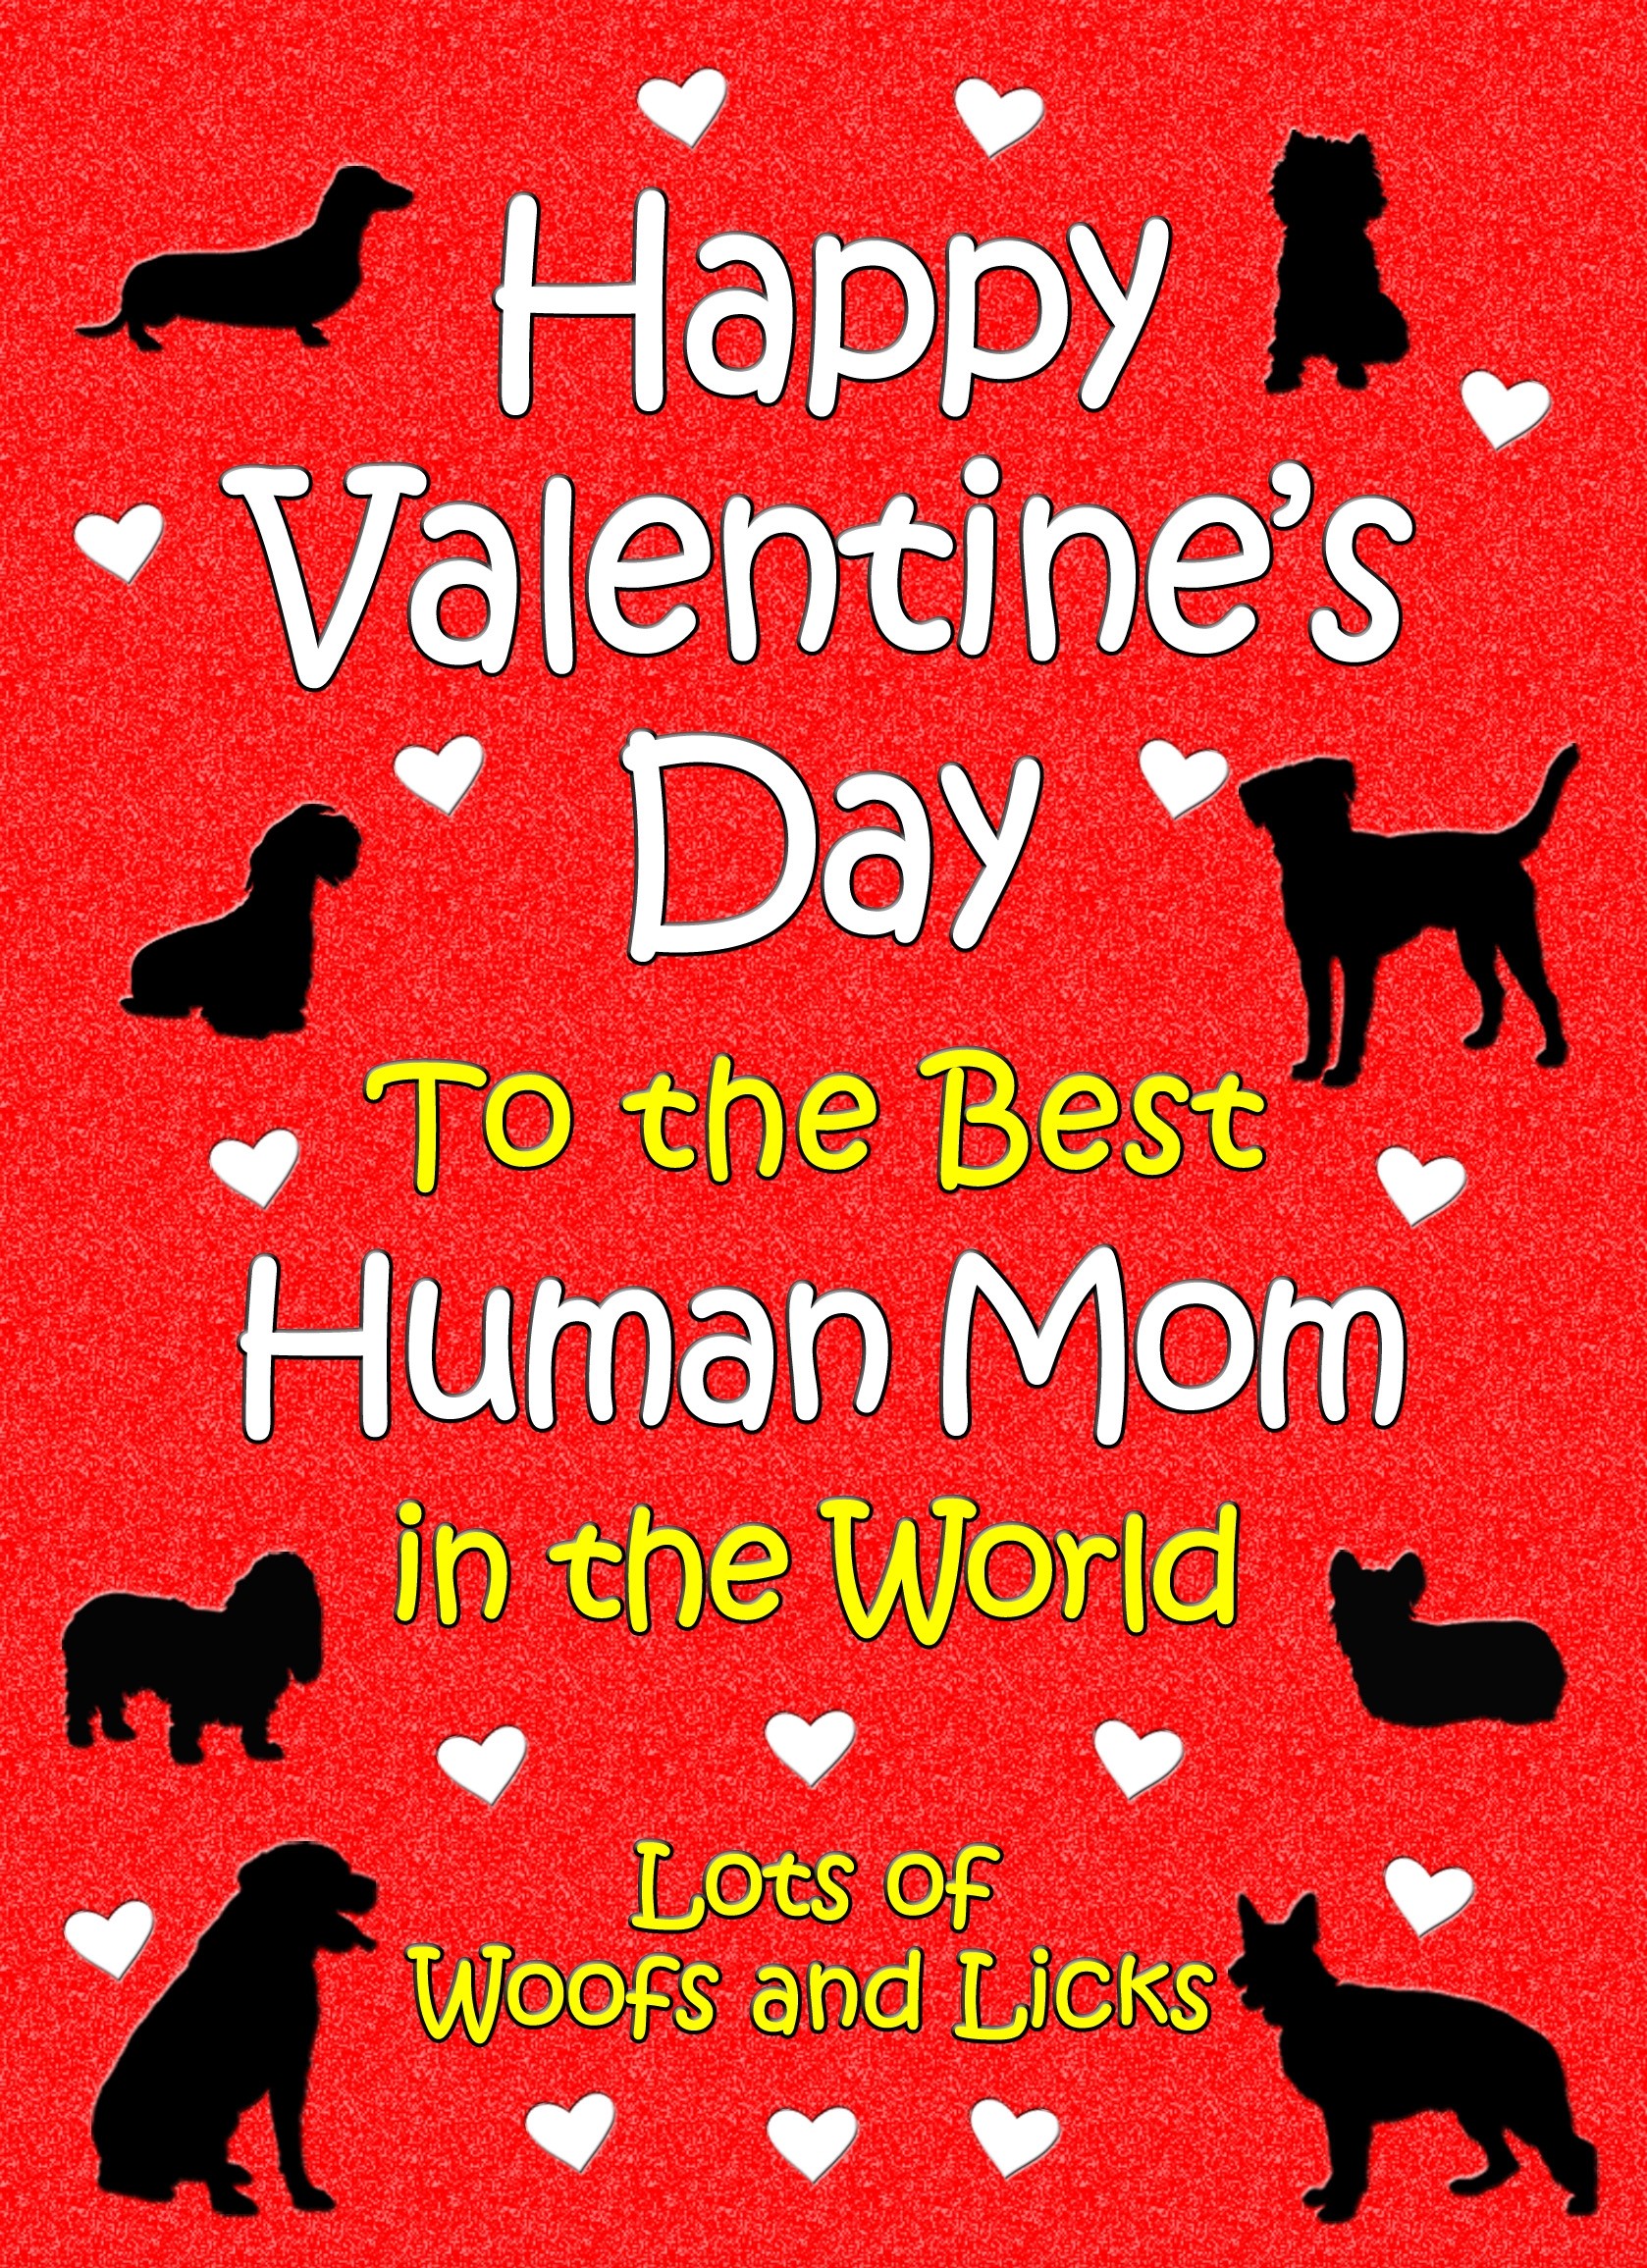 From The Dog Valentines Day Card (Human Mom)